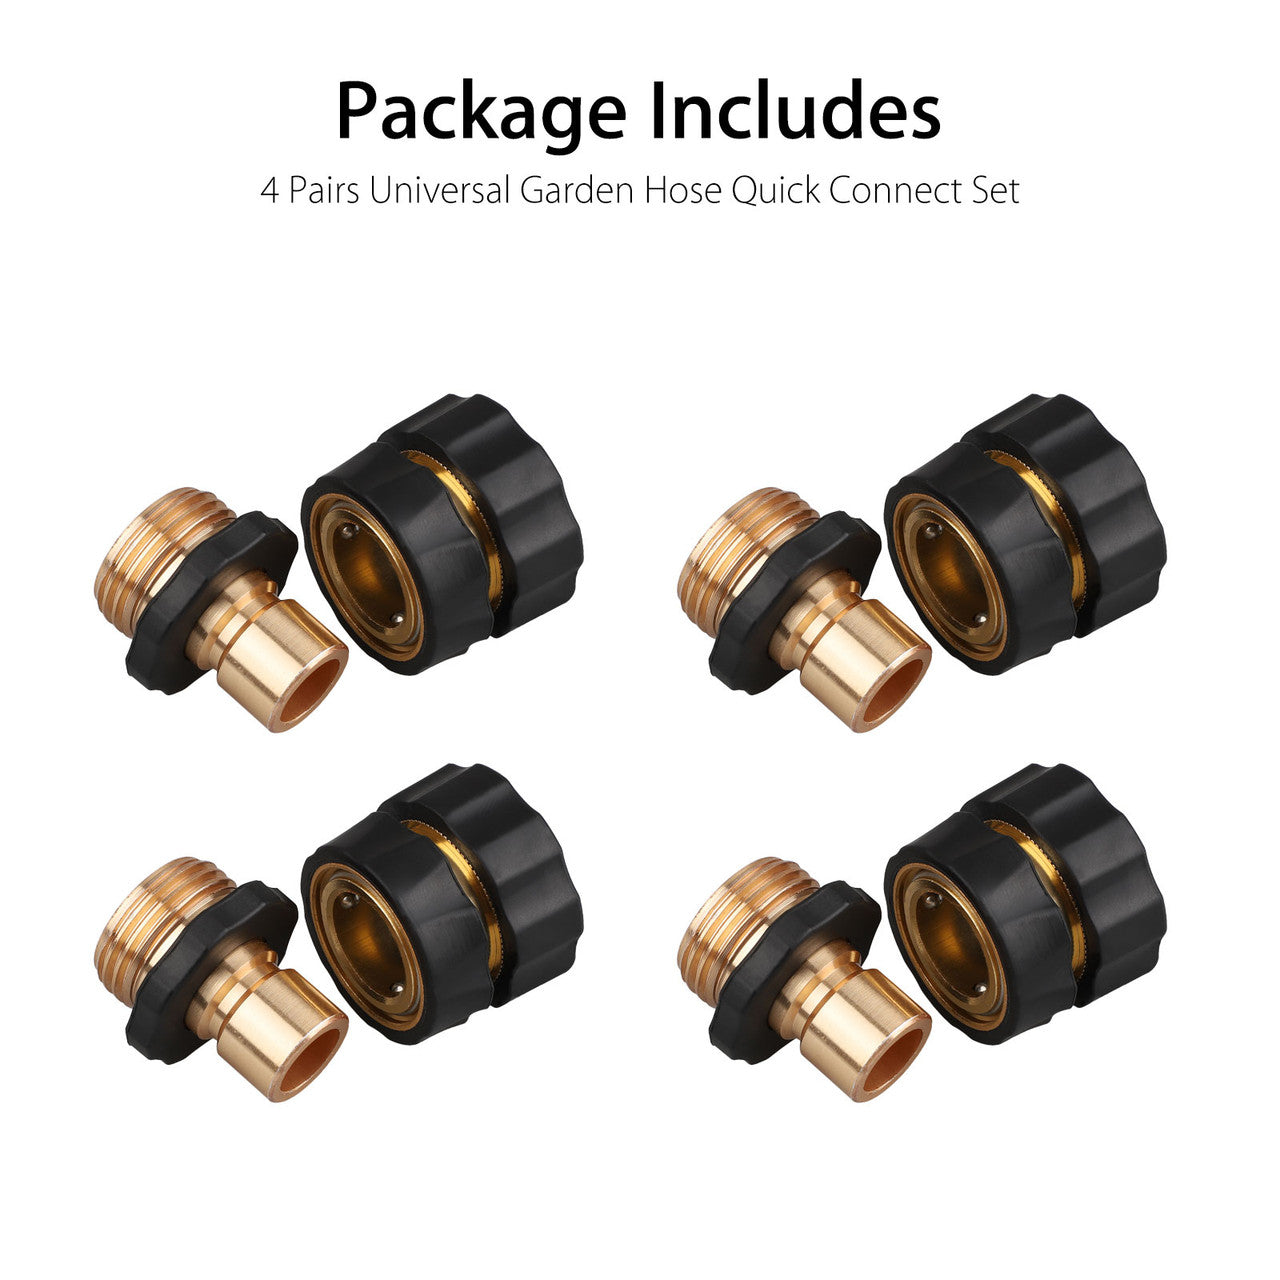 Brass Hose Tap Adapter Connector,Standard 3/4" Aluminum Garden Hose Quick Connectors,4 Female Connectors + 4 Male Connectors,For outdoor use, Set of 4 pack